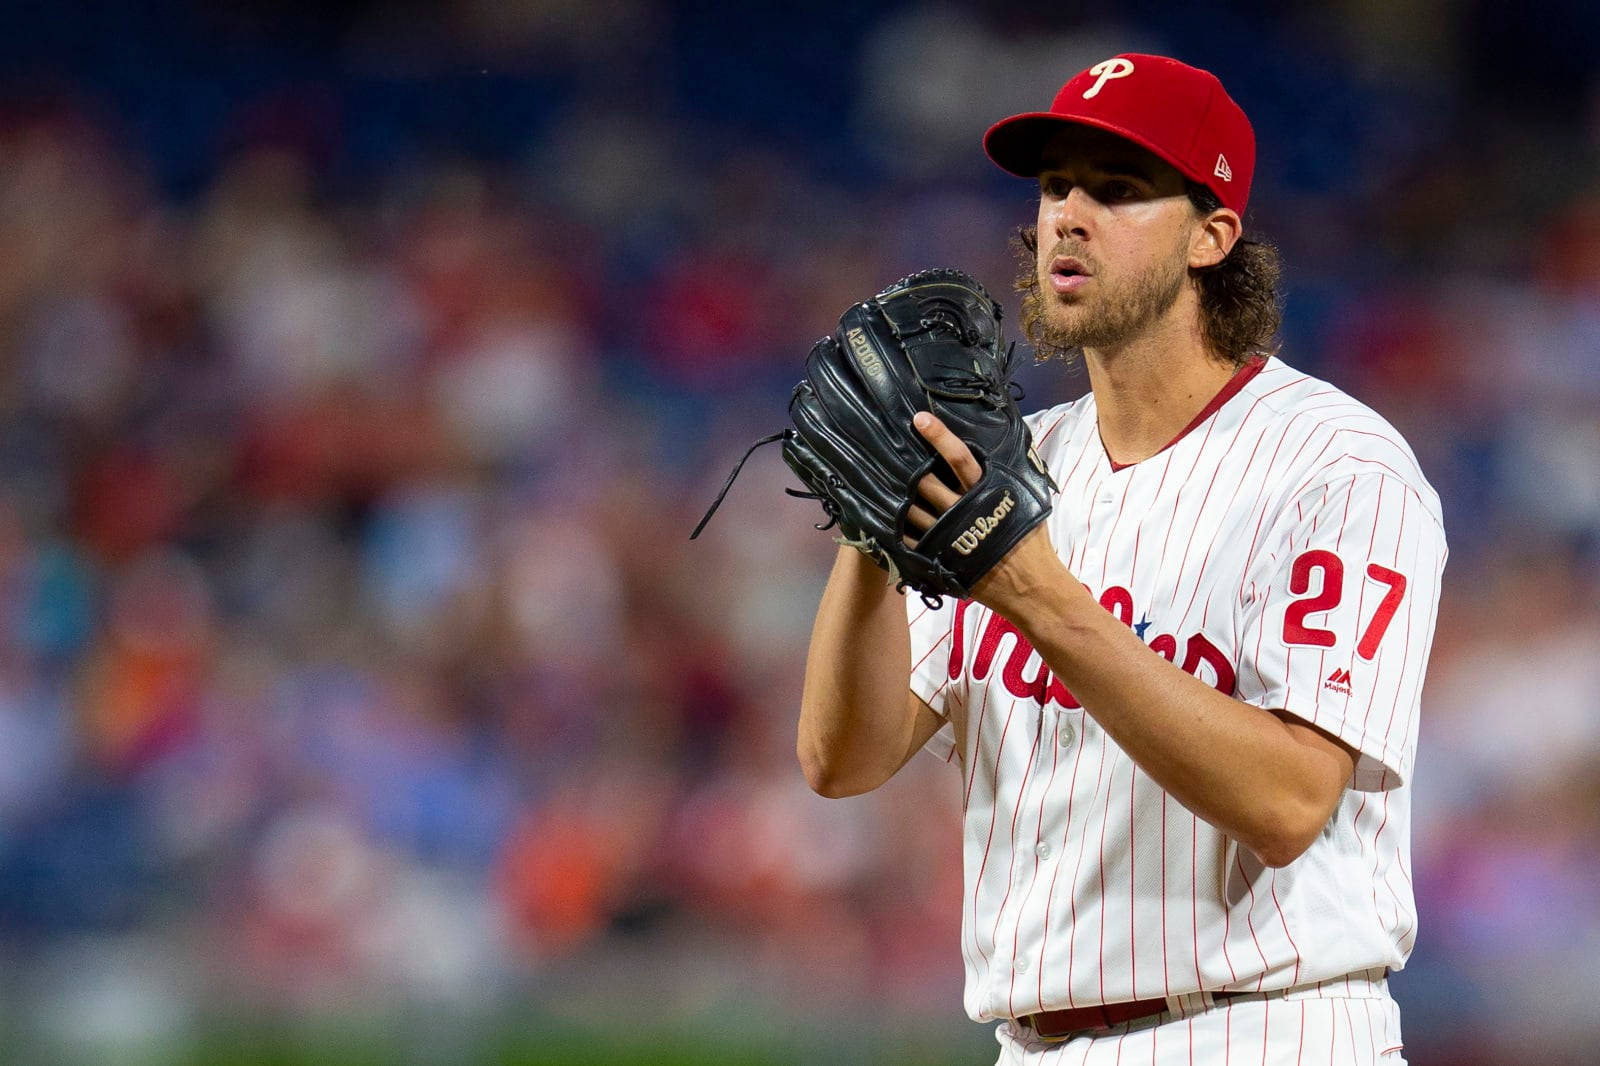 Aaronnola Clap Could Be Translated Into Italian As 